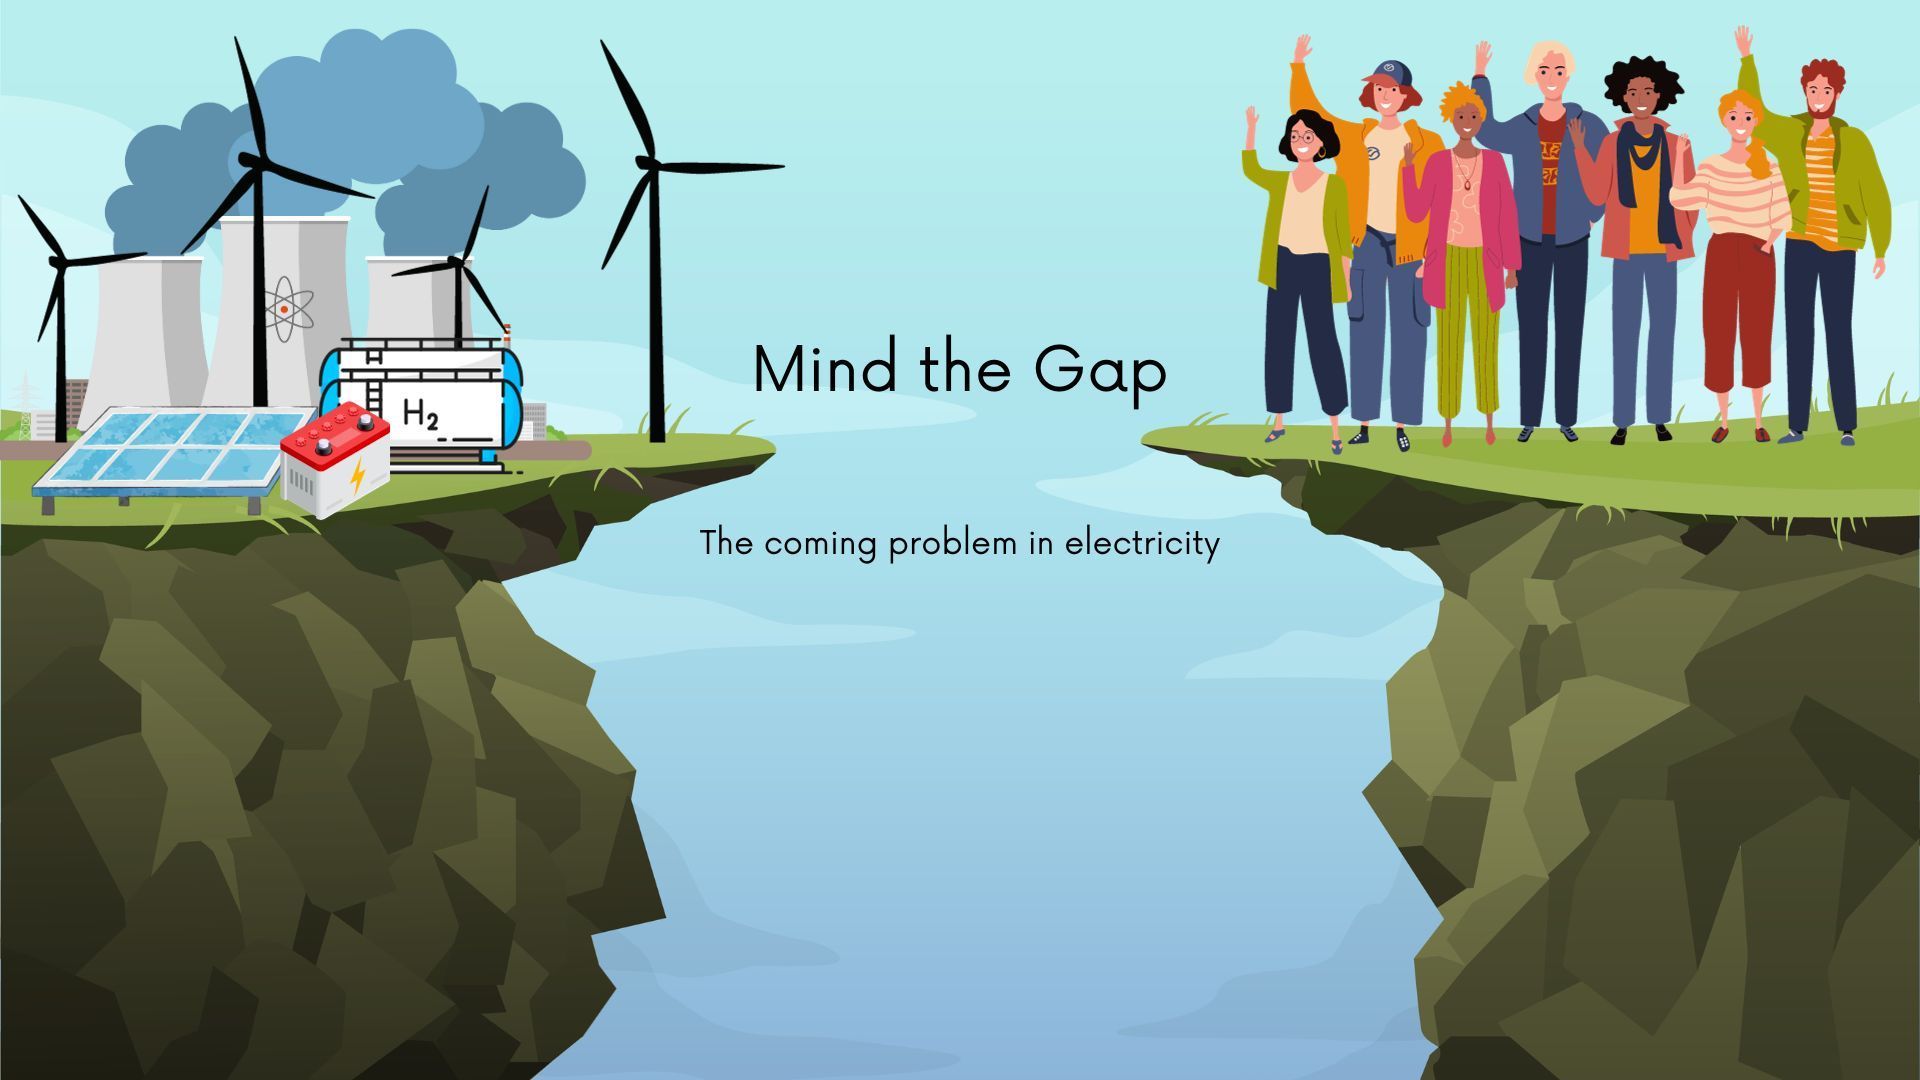 Picture shows energy sources on one side and people on the other side of a gap.